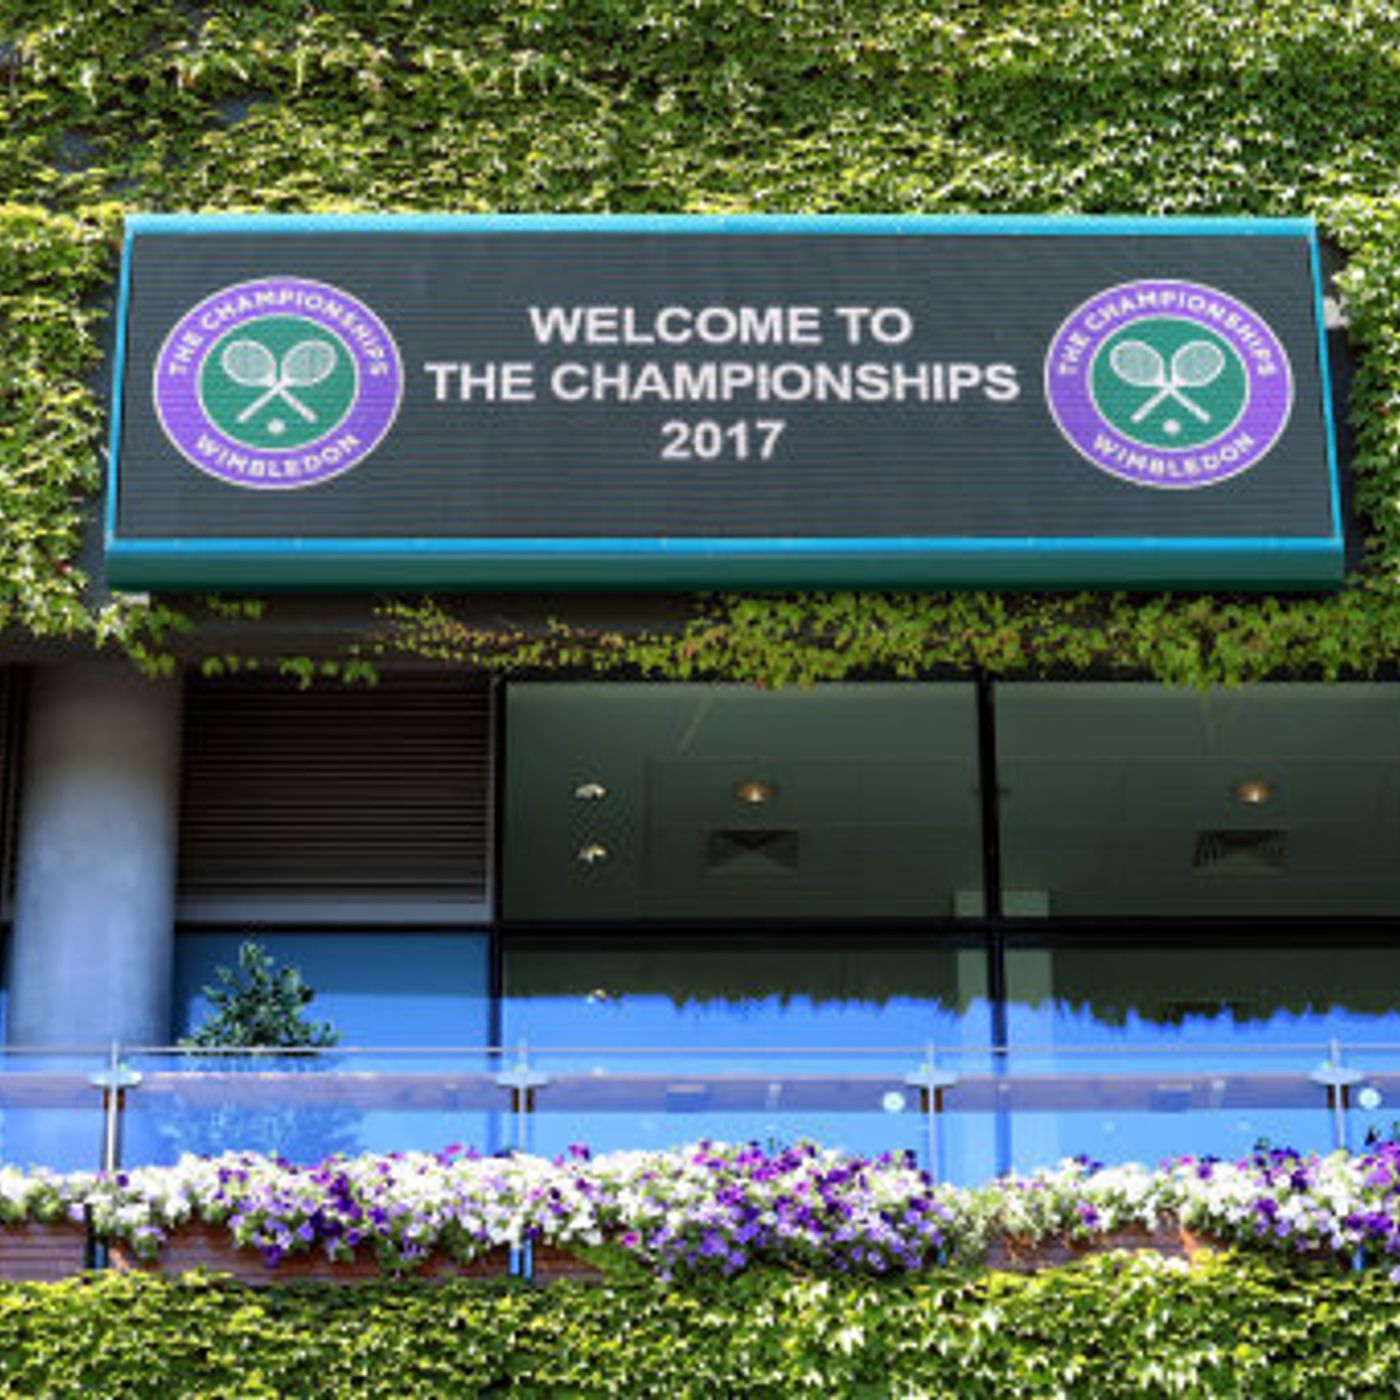 Wimbledon 2017 with William Hill